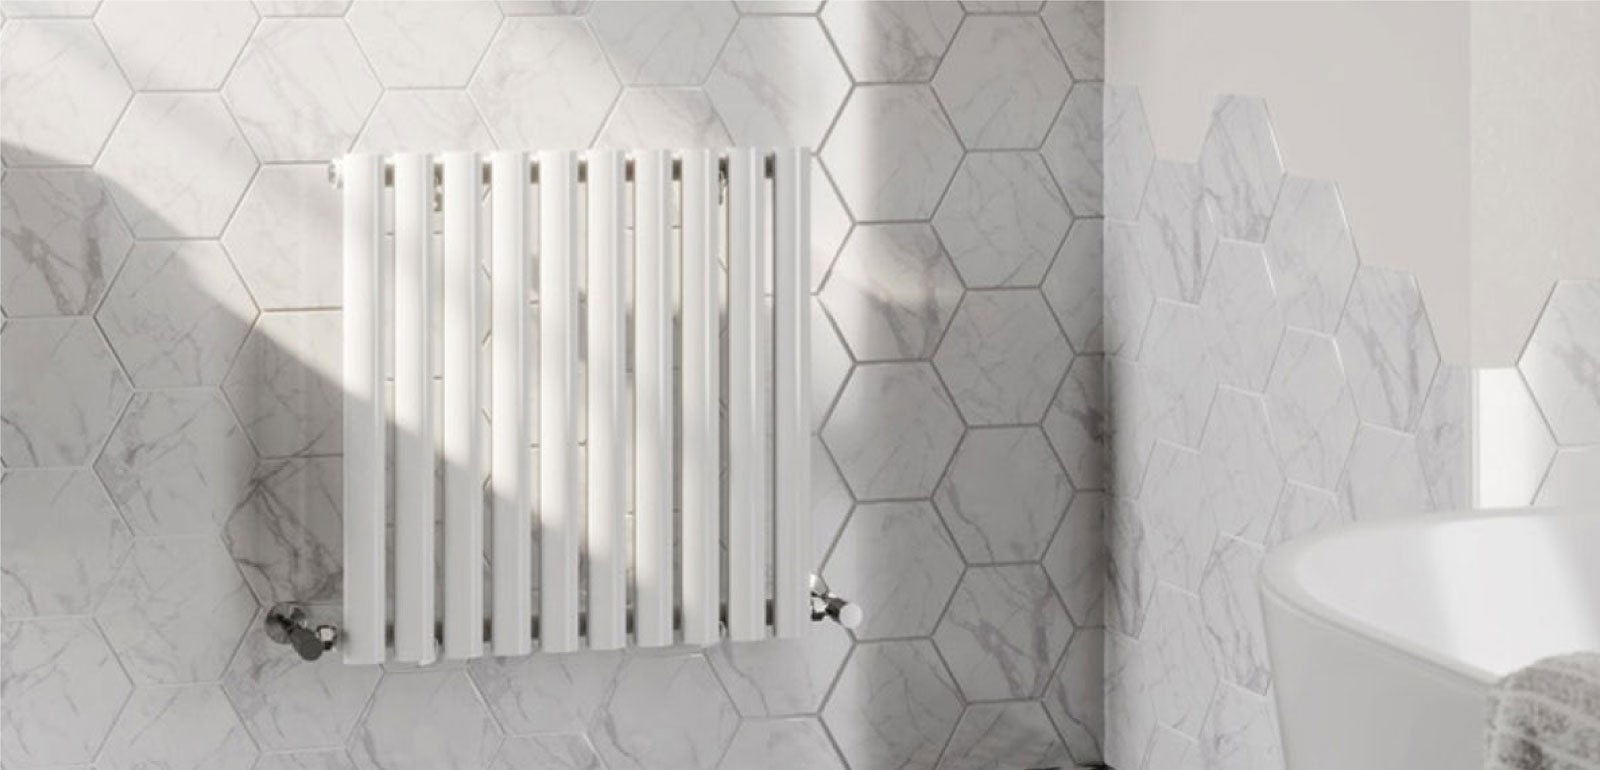 Bathroom shelving,Hex Shape,Engineered Stone,Stainless steel,No Rust Accessories 